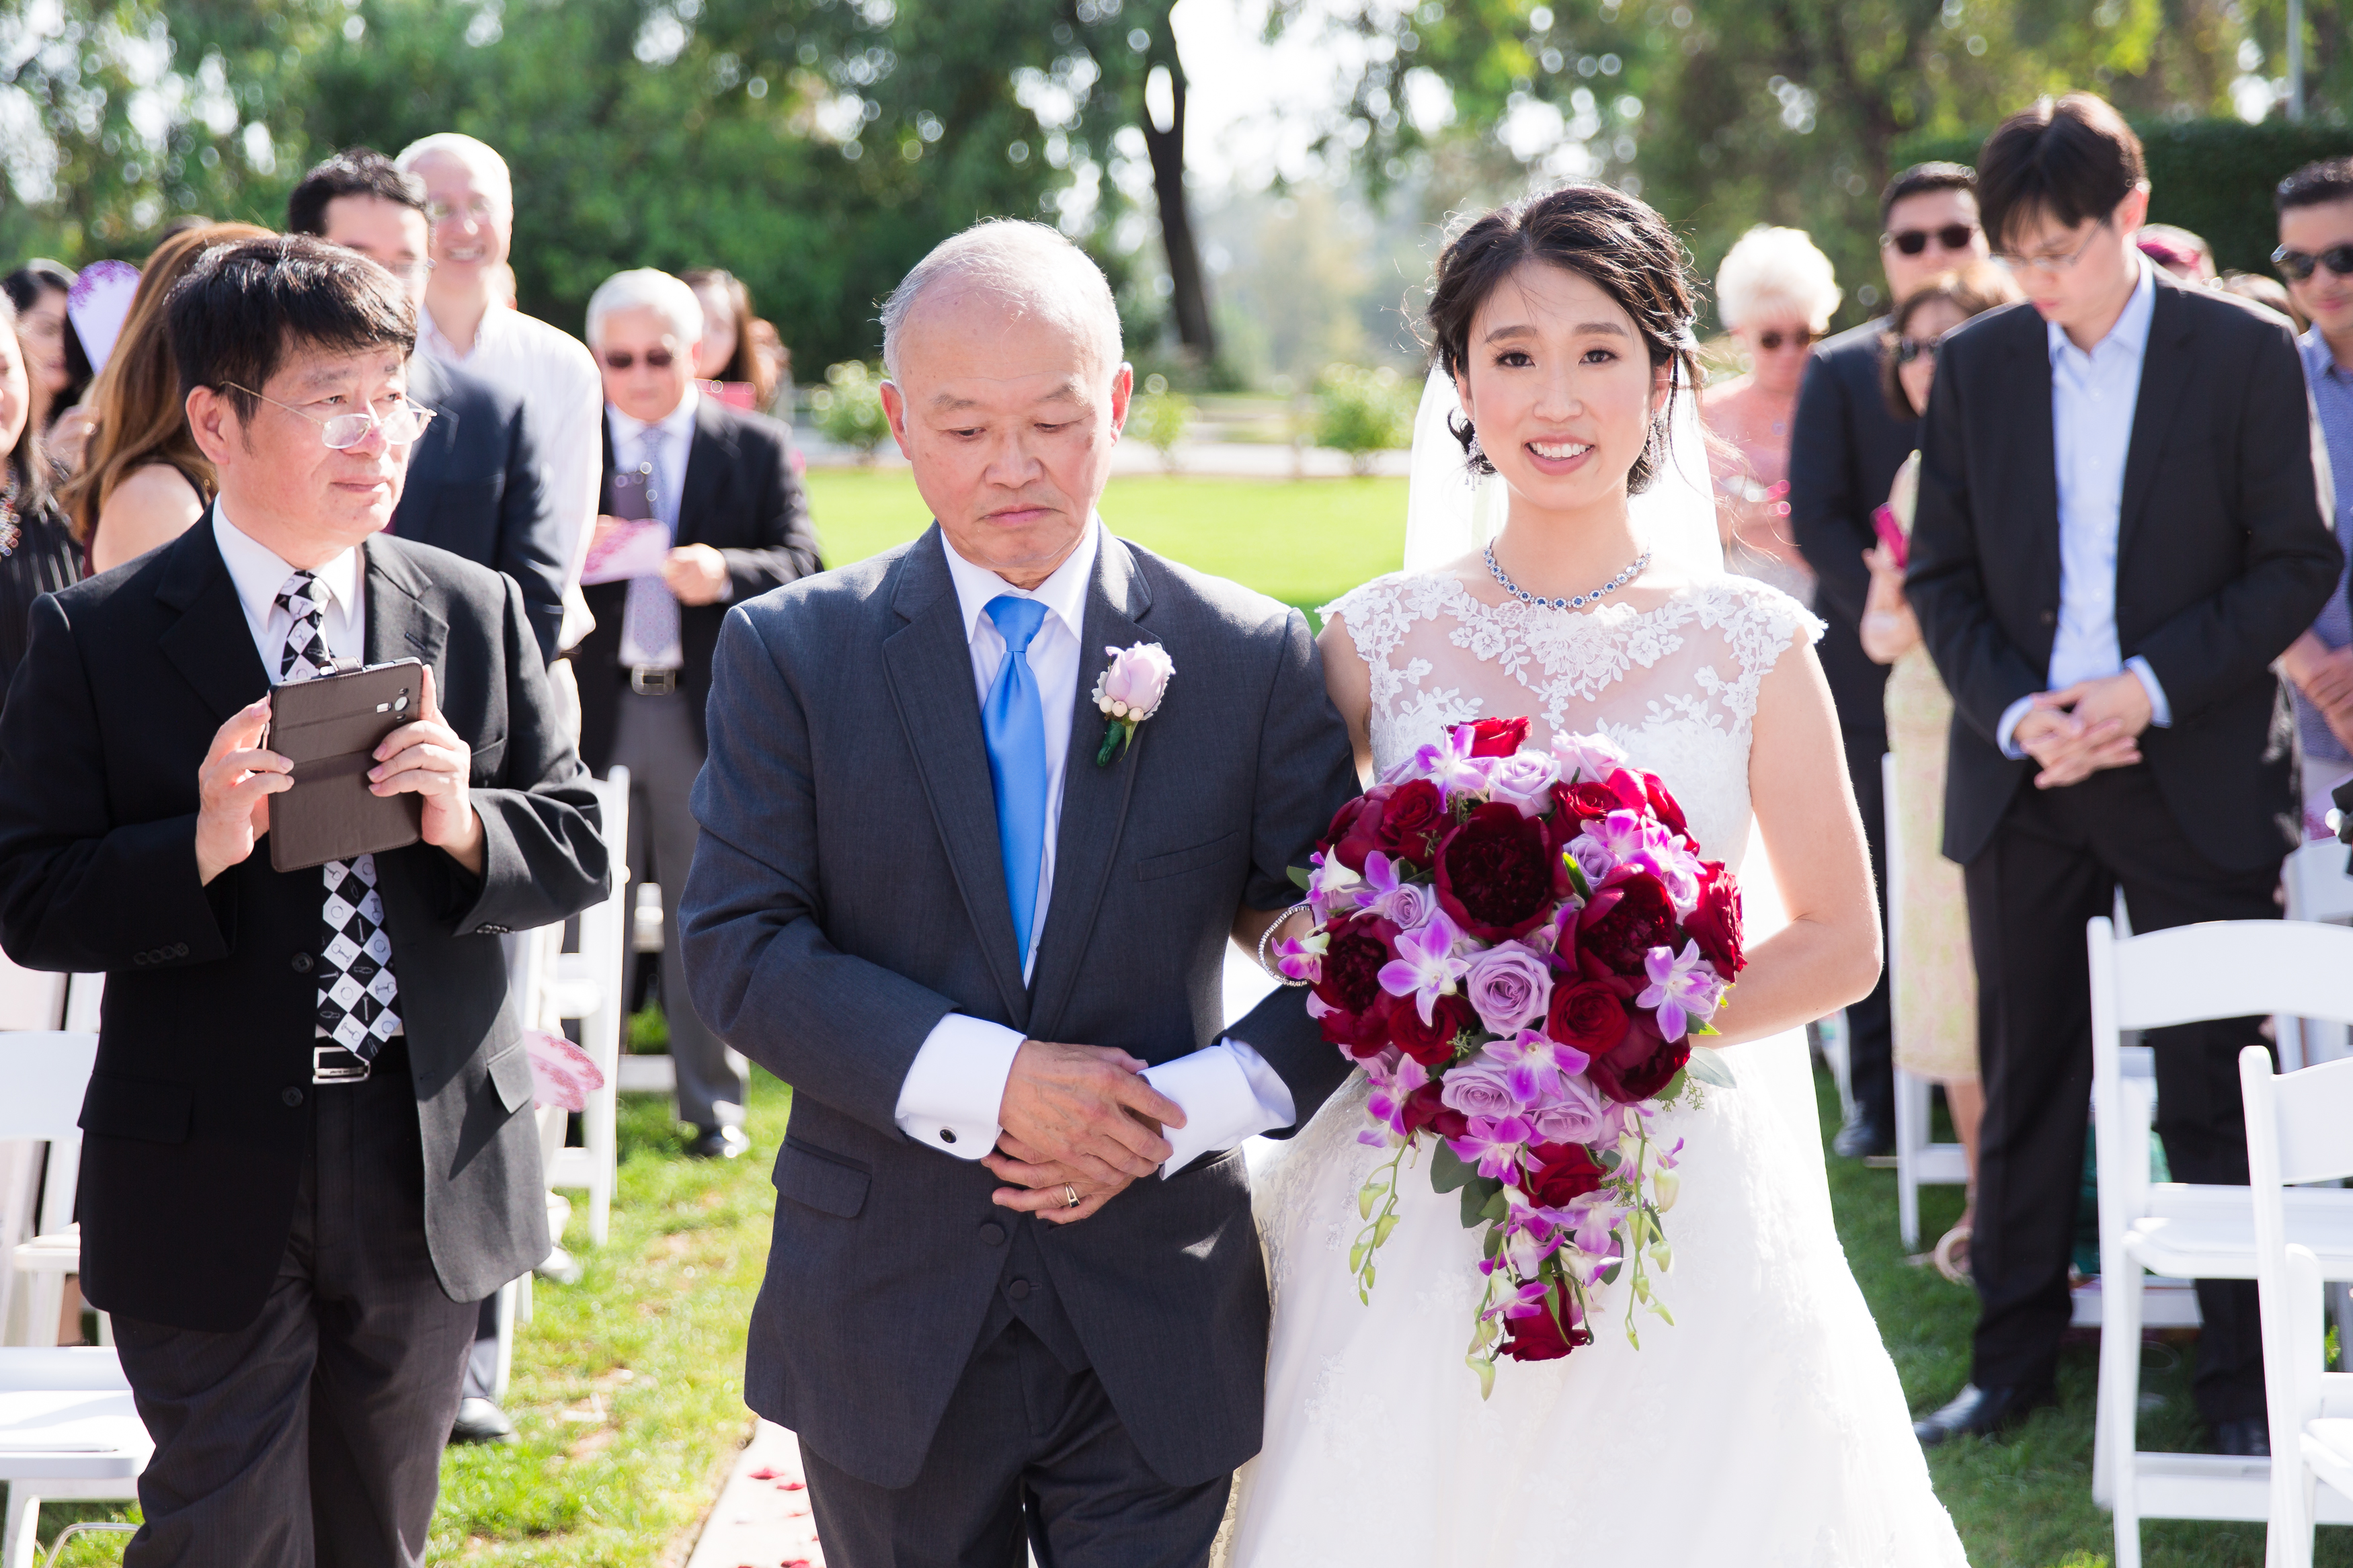 Father of bride gets emotional walking down aisle